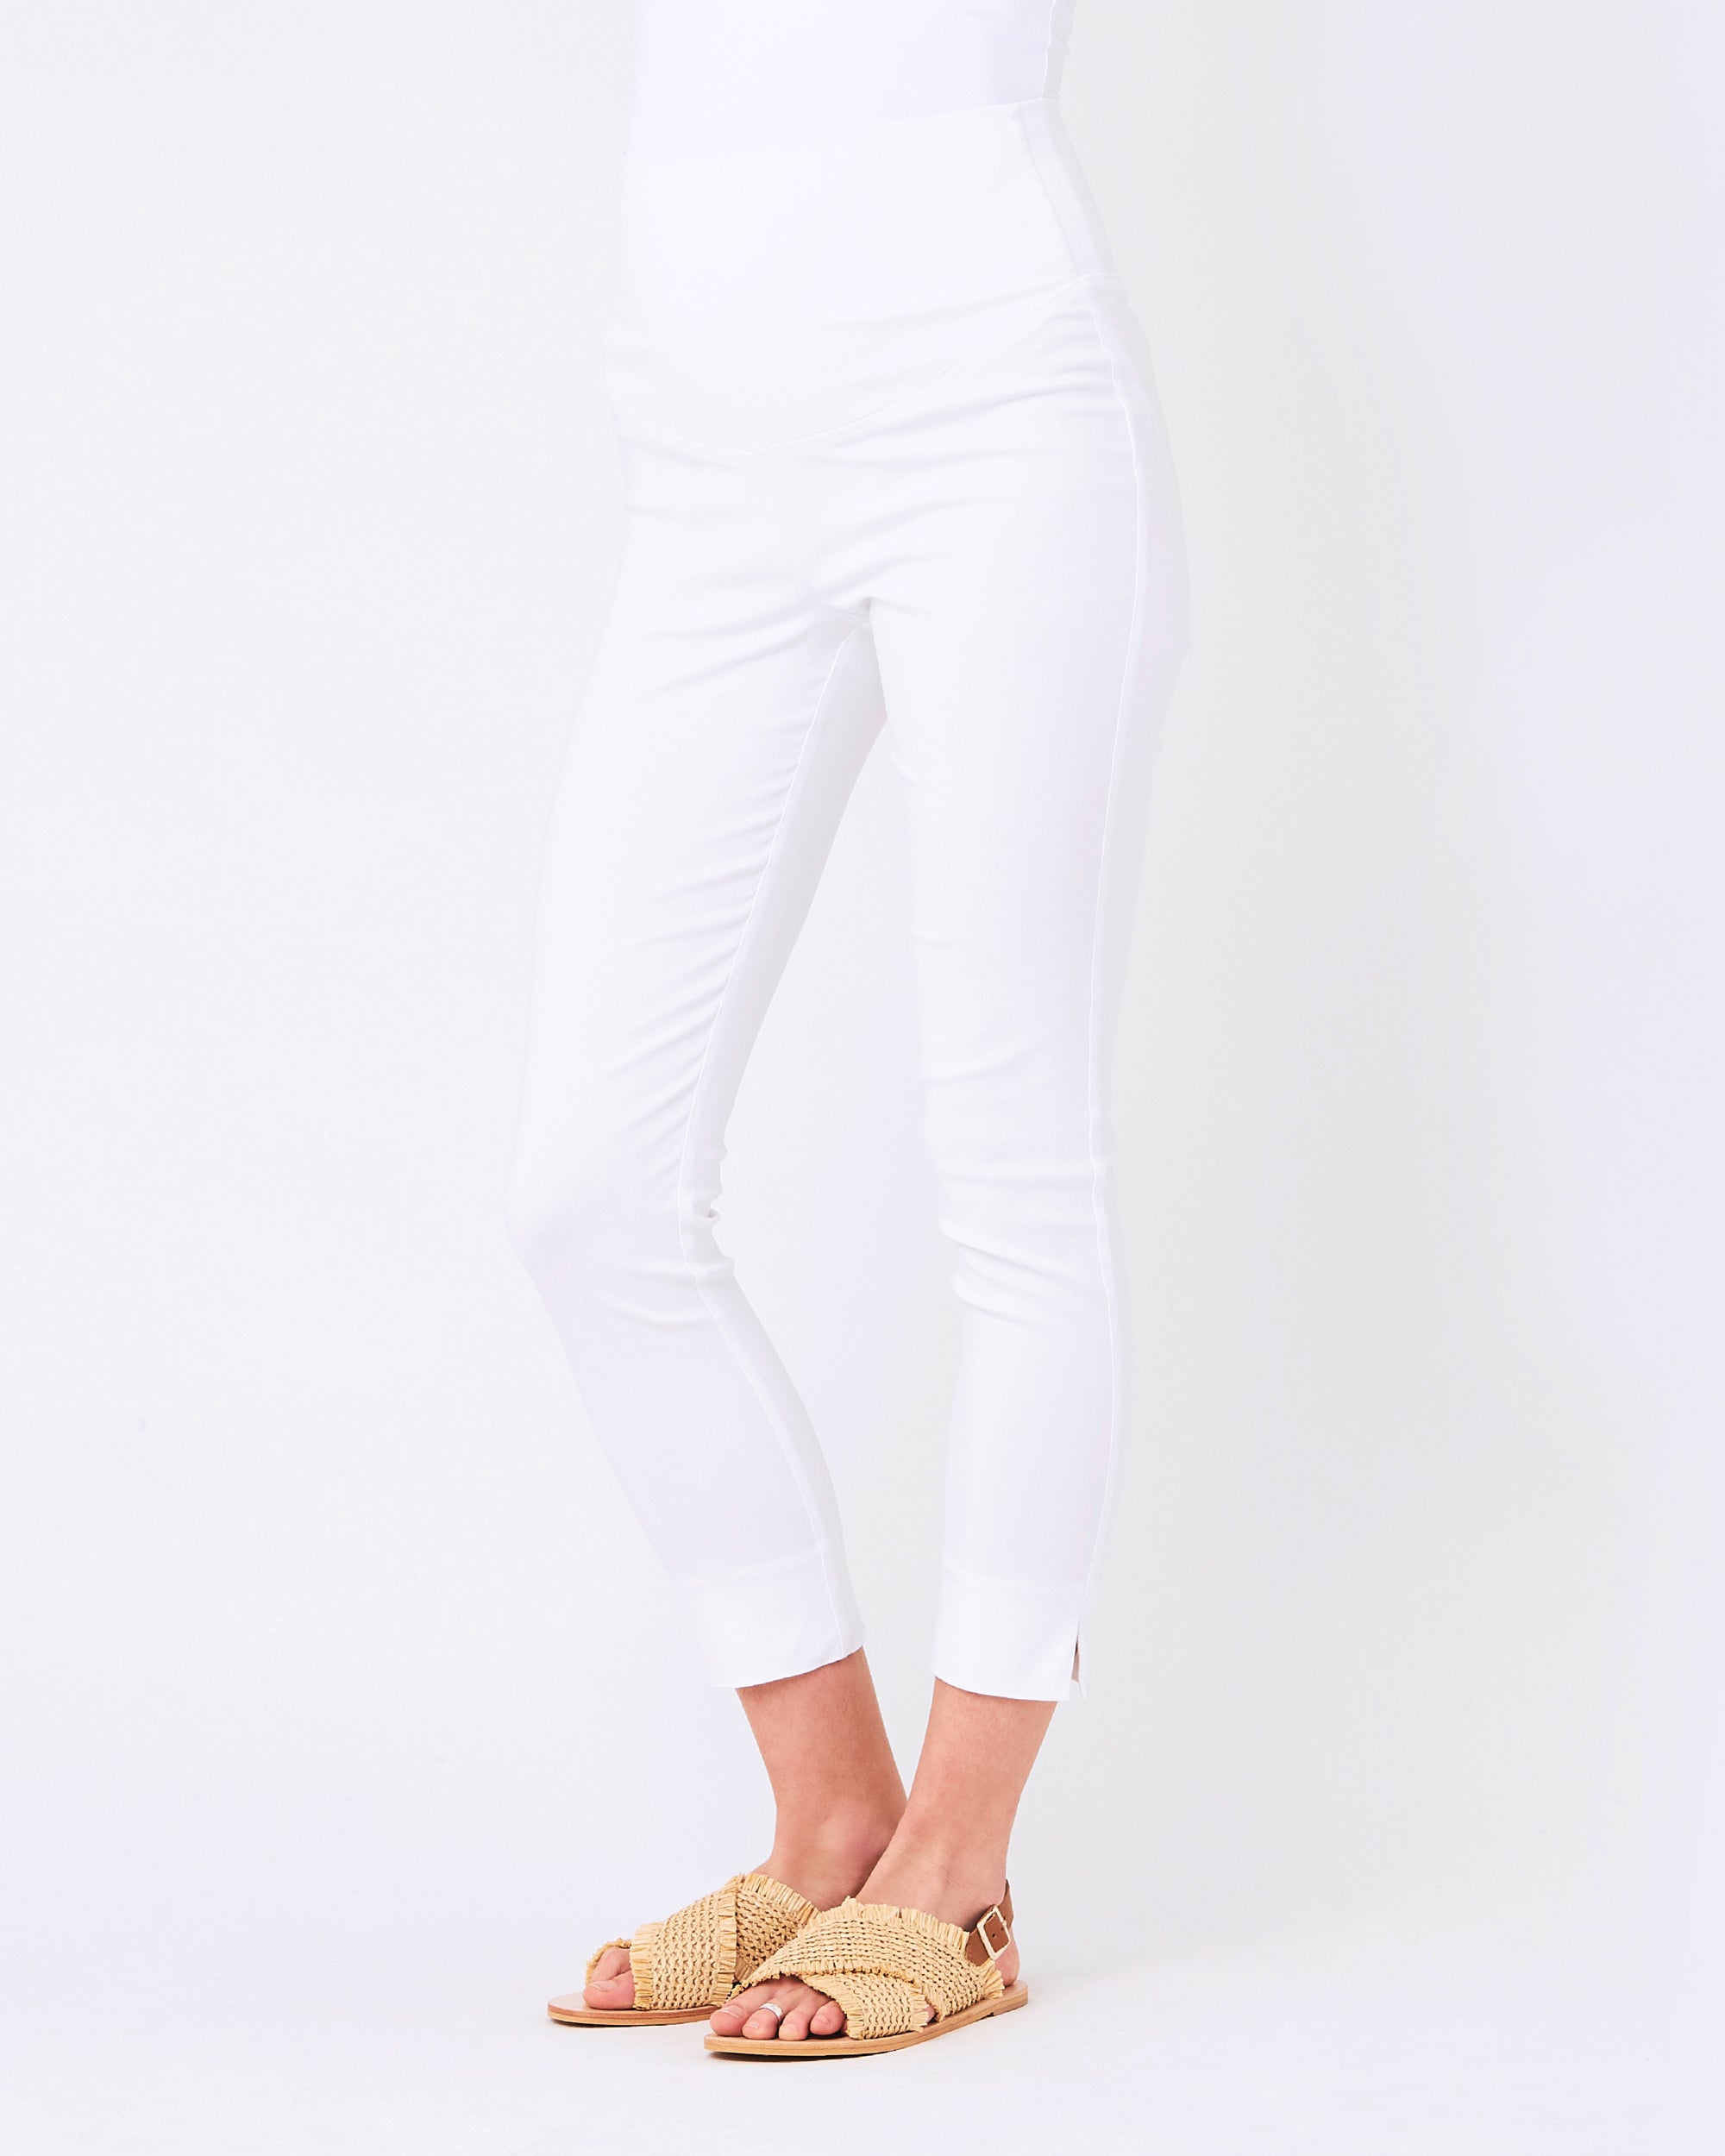 Shop for White & Cream | Holiday Fashion | Trousers & Shorts | Womens |  online at Swimwear365